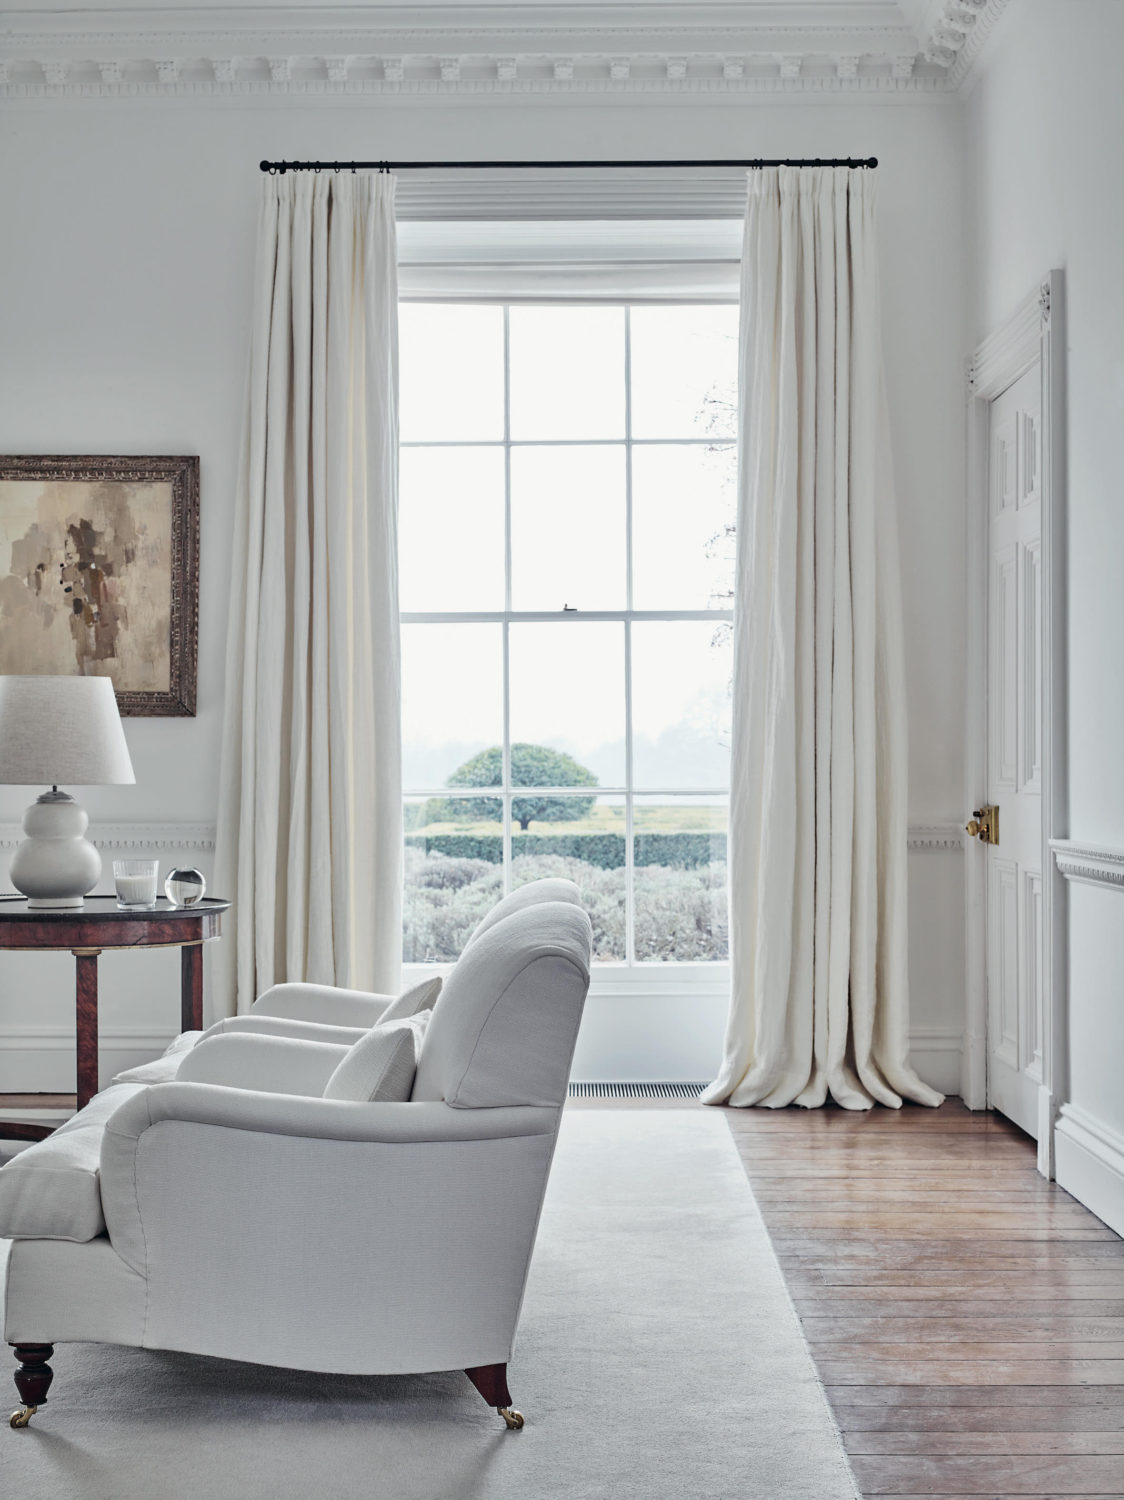 For the love of white- Chrissie Rucker's amazing house in the English countryside